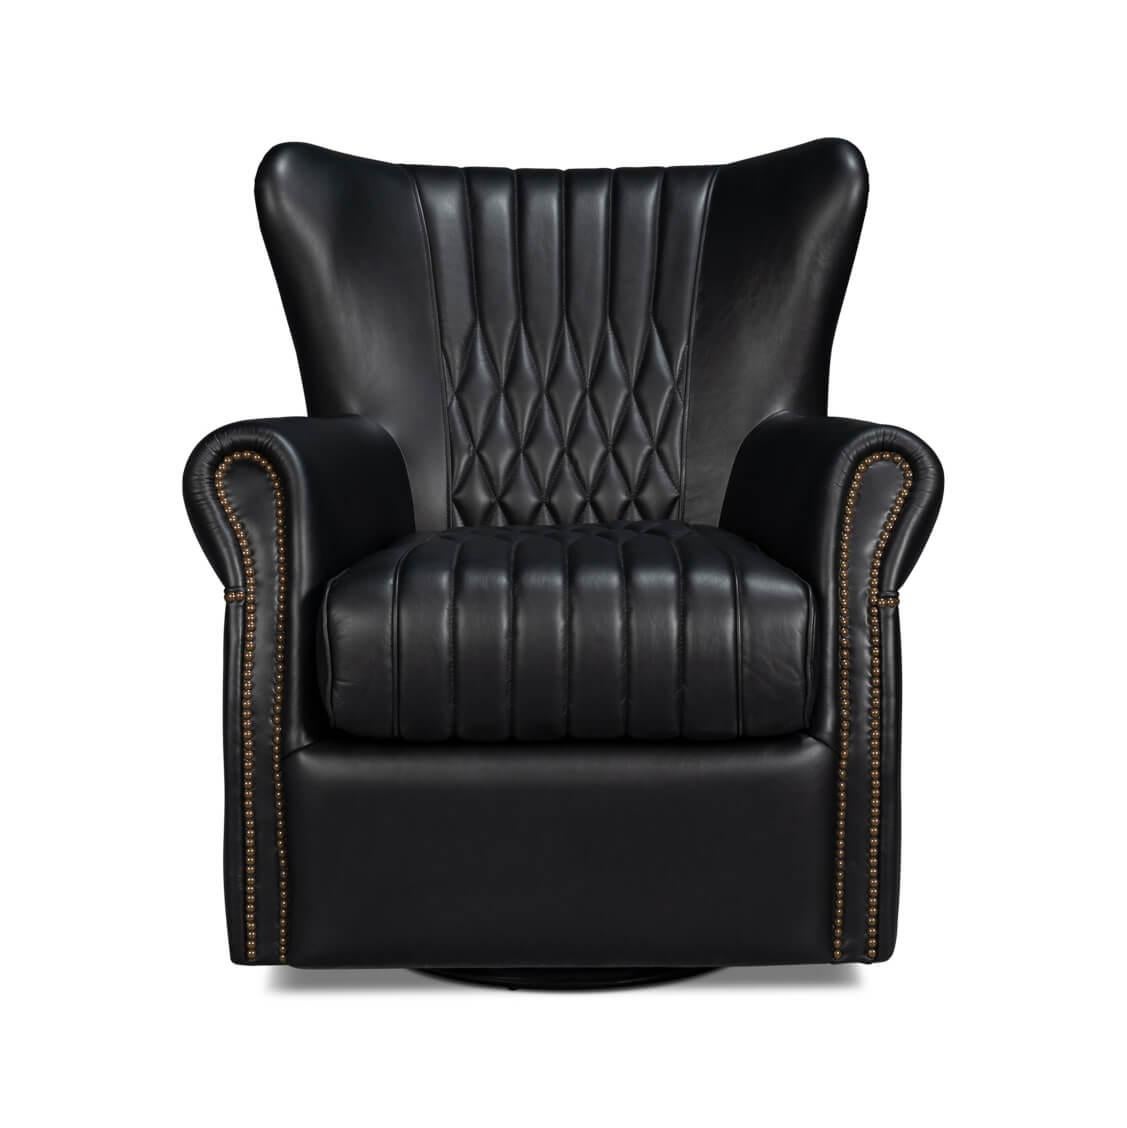 A masterpiece that encapsulates timeless charm and contemporary comfort. Crafted with high-quality black leather, it boasts iconic diamond quilting and channels that bring an air of aristocratic elegance to any room.
With a high winged backrest, and